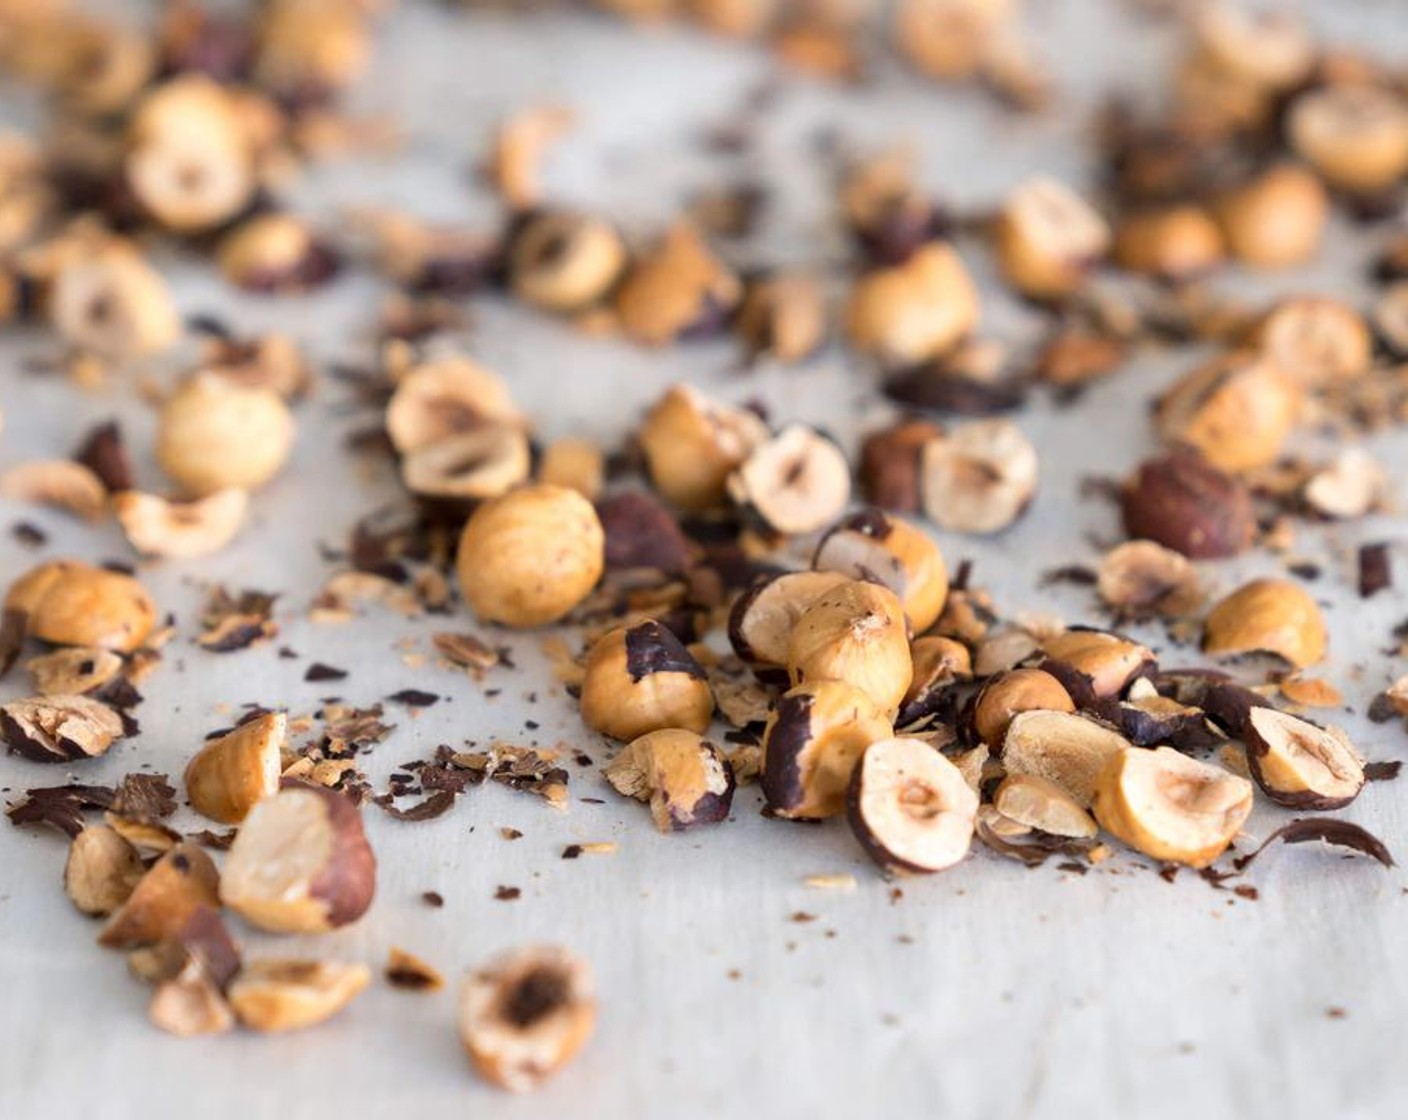 step 5 While doing that, roast Hazelnuts. Place chopped nuts on a baking sheet. Bake for 5-10 minutes or until toasted and crunchy. Watch carefully to ensure they do not burn.